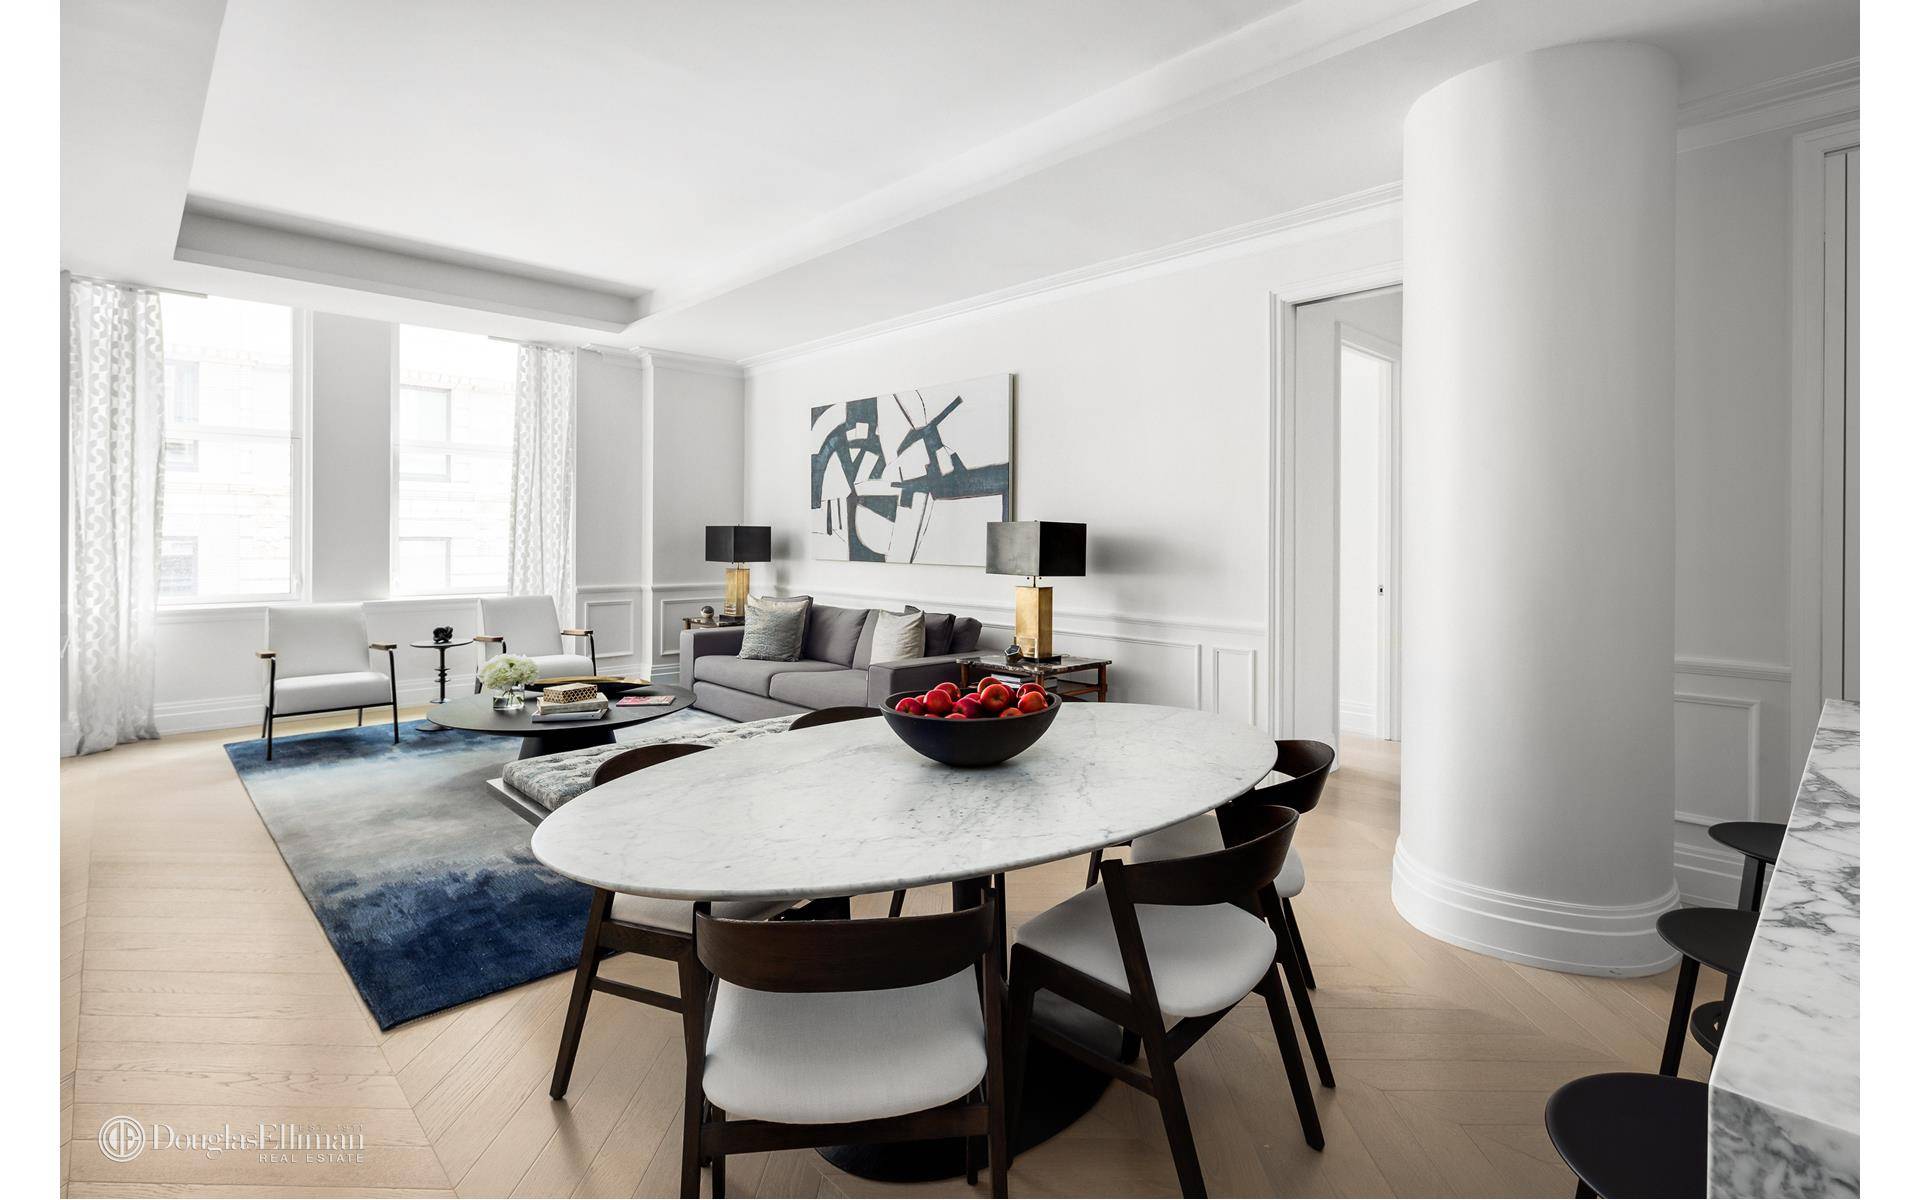 Paying homage to the most coveted elements of an architectural masterpiece at 108 Leonard, ornamental majesty and historic provenance are leveraged anew with fresh modern forms and contemporary design priorities.